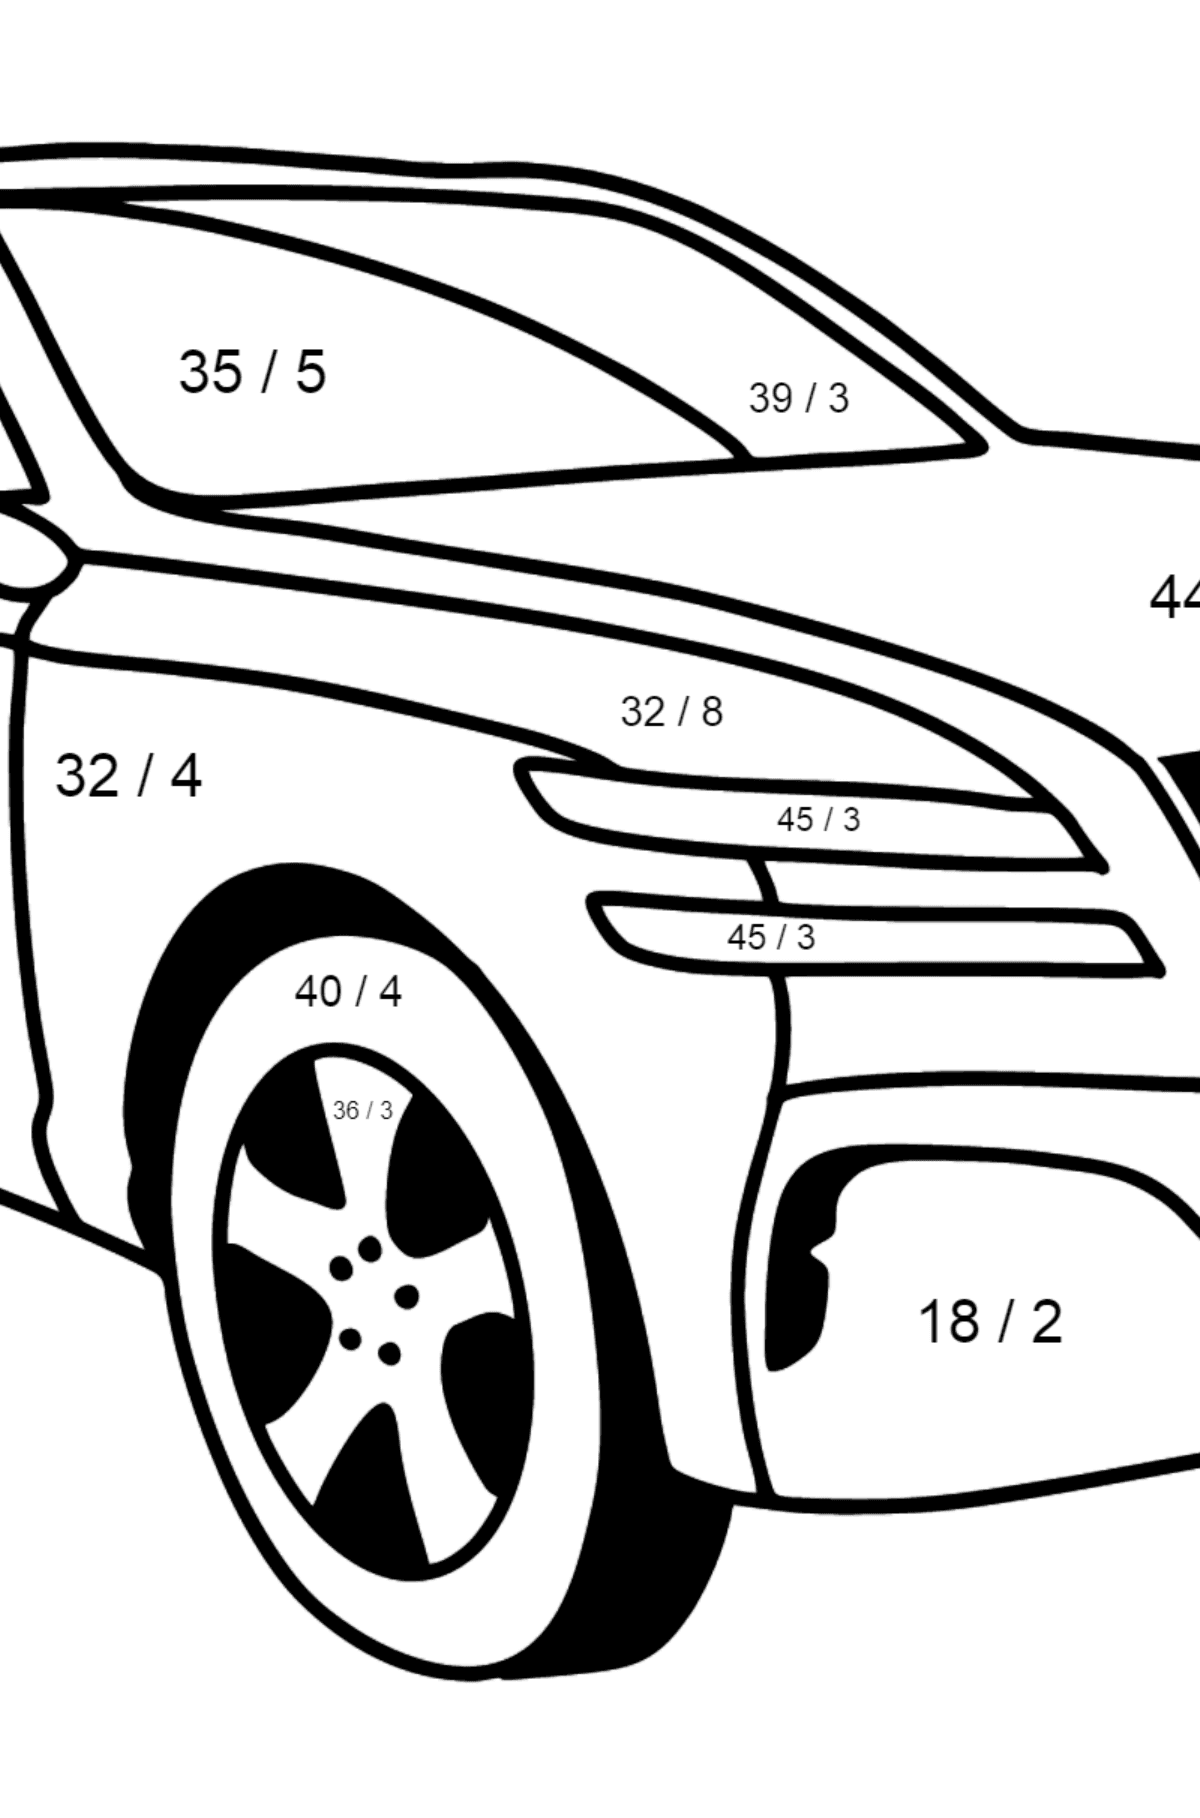 Genesis car coloring page - Math Coloring - Division for Kids